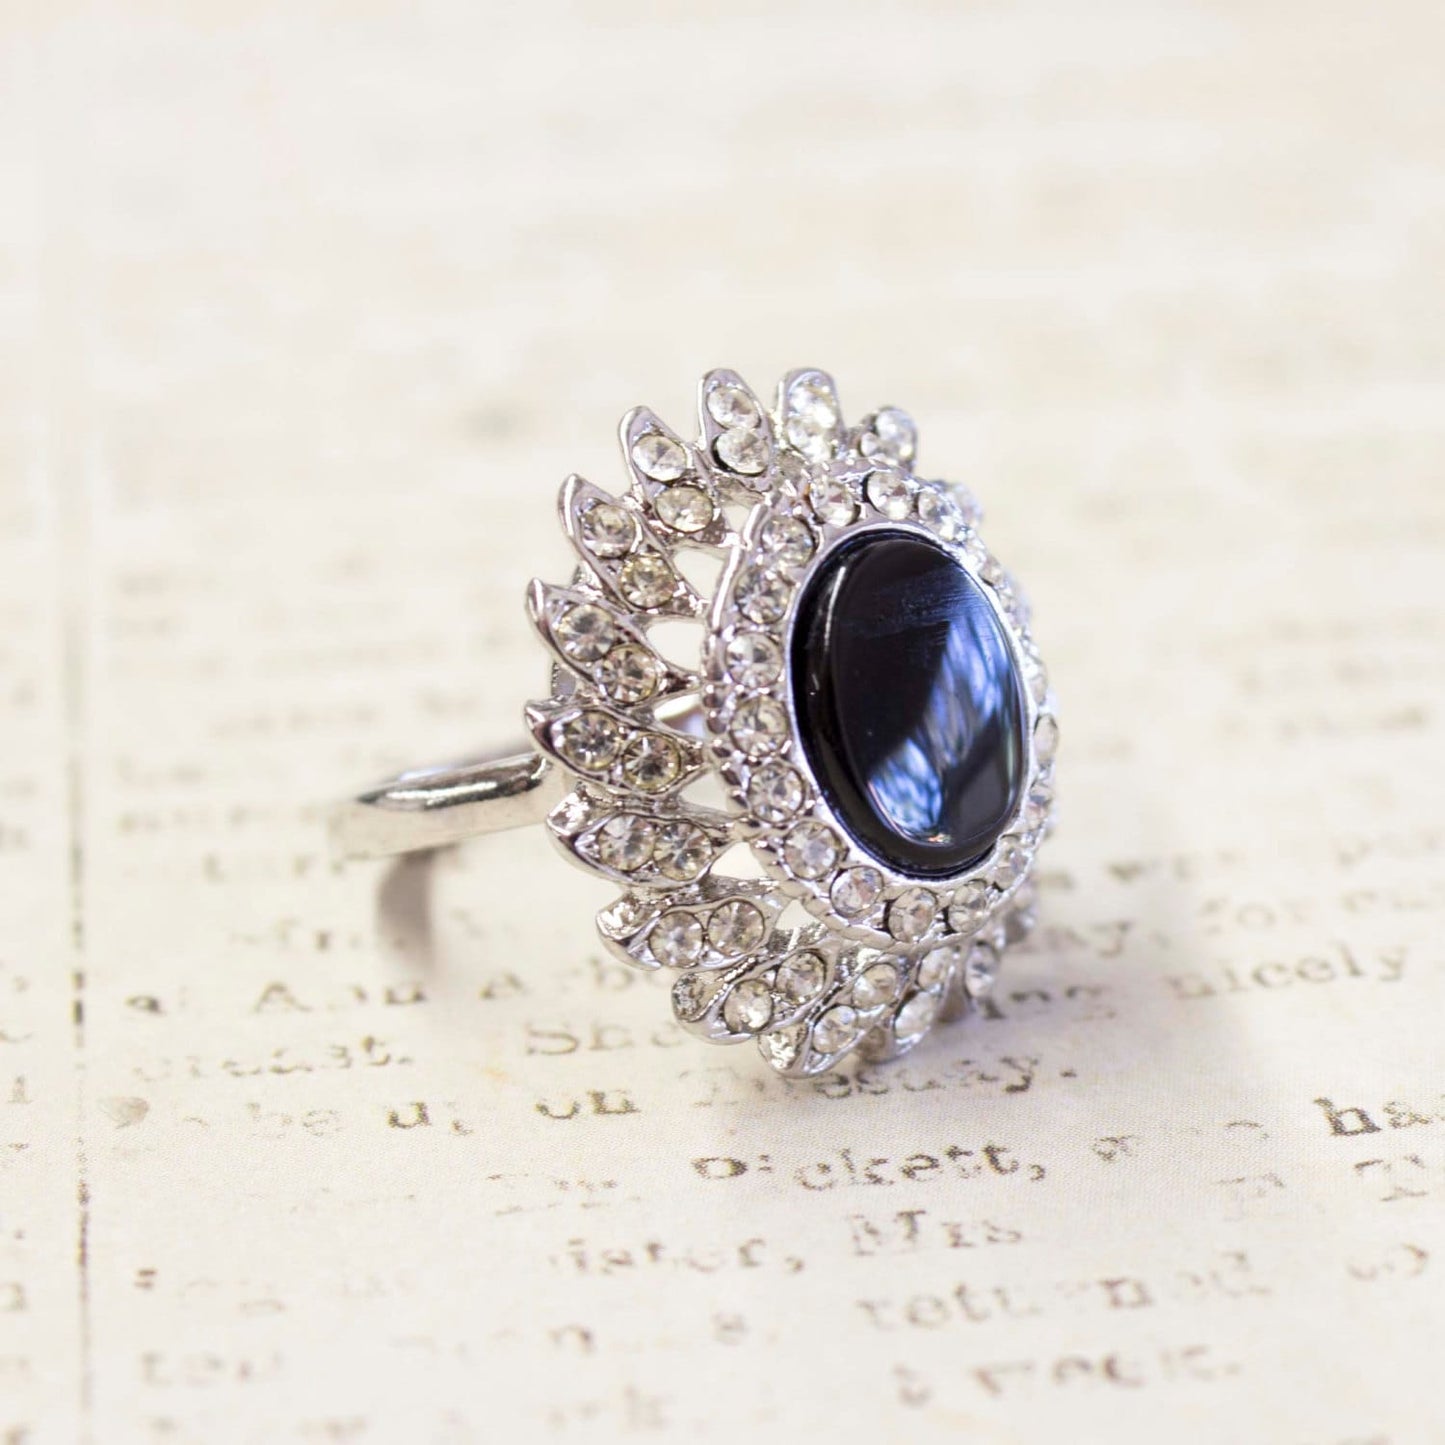 Vintage Ring Genuine Onyx Ring Clear Swarovski Crystals 18k White Gold Victorian Style Antique Womans #R106